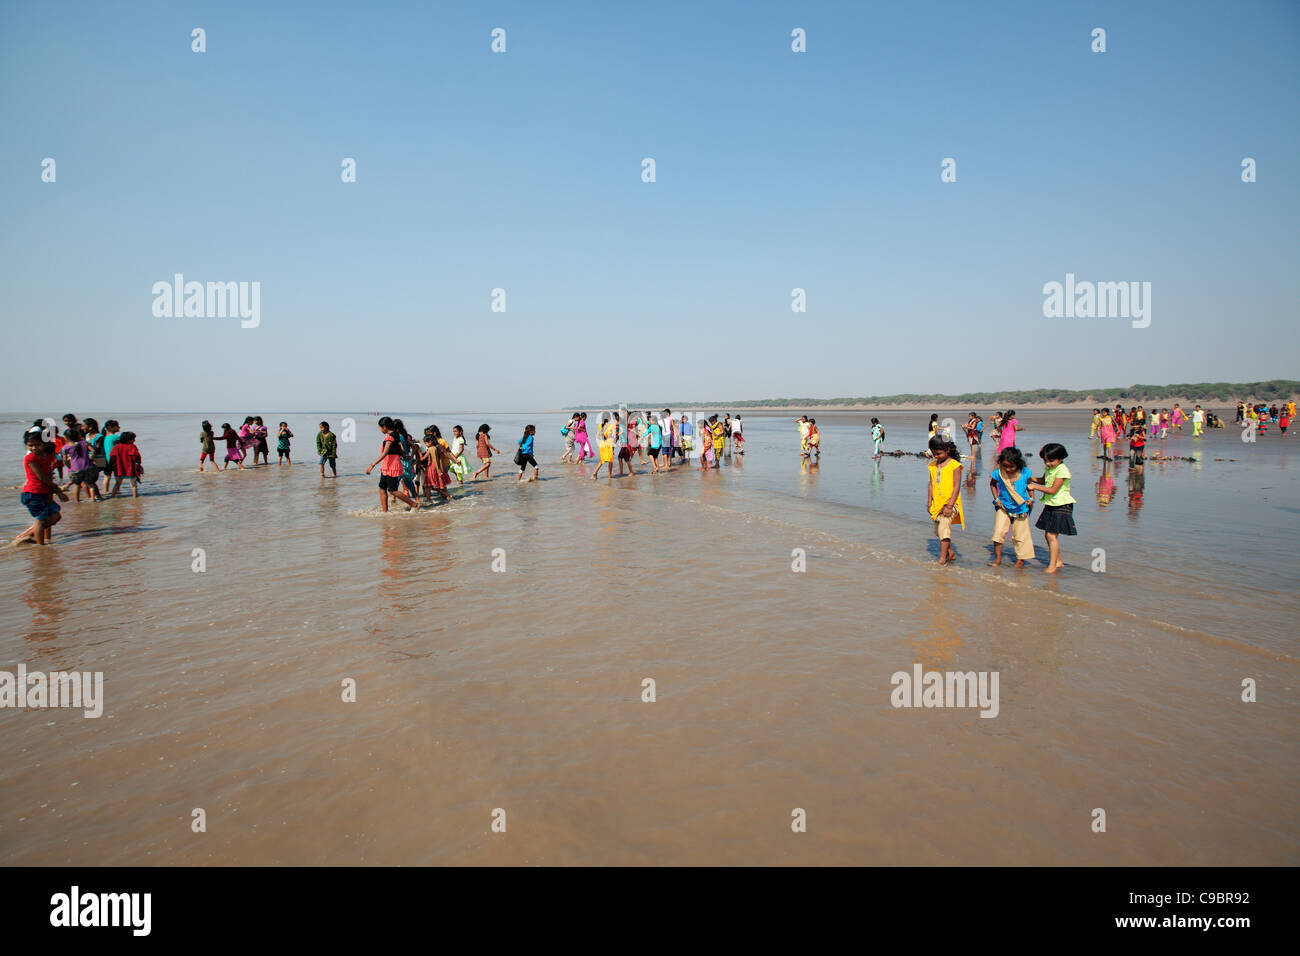 School trip to the beach of Dandi, where Mohandas Gandhi finished his Salt March in 1930. Gujarat state, India. Stock Photo